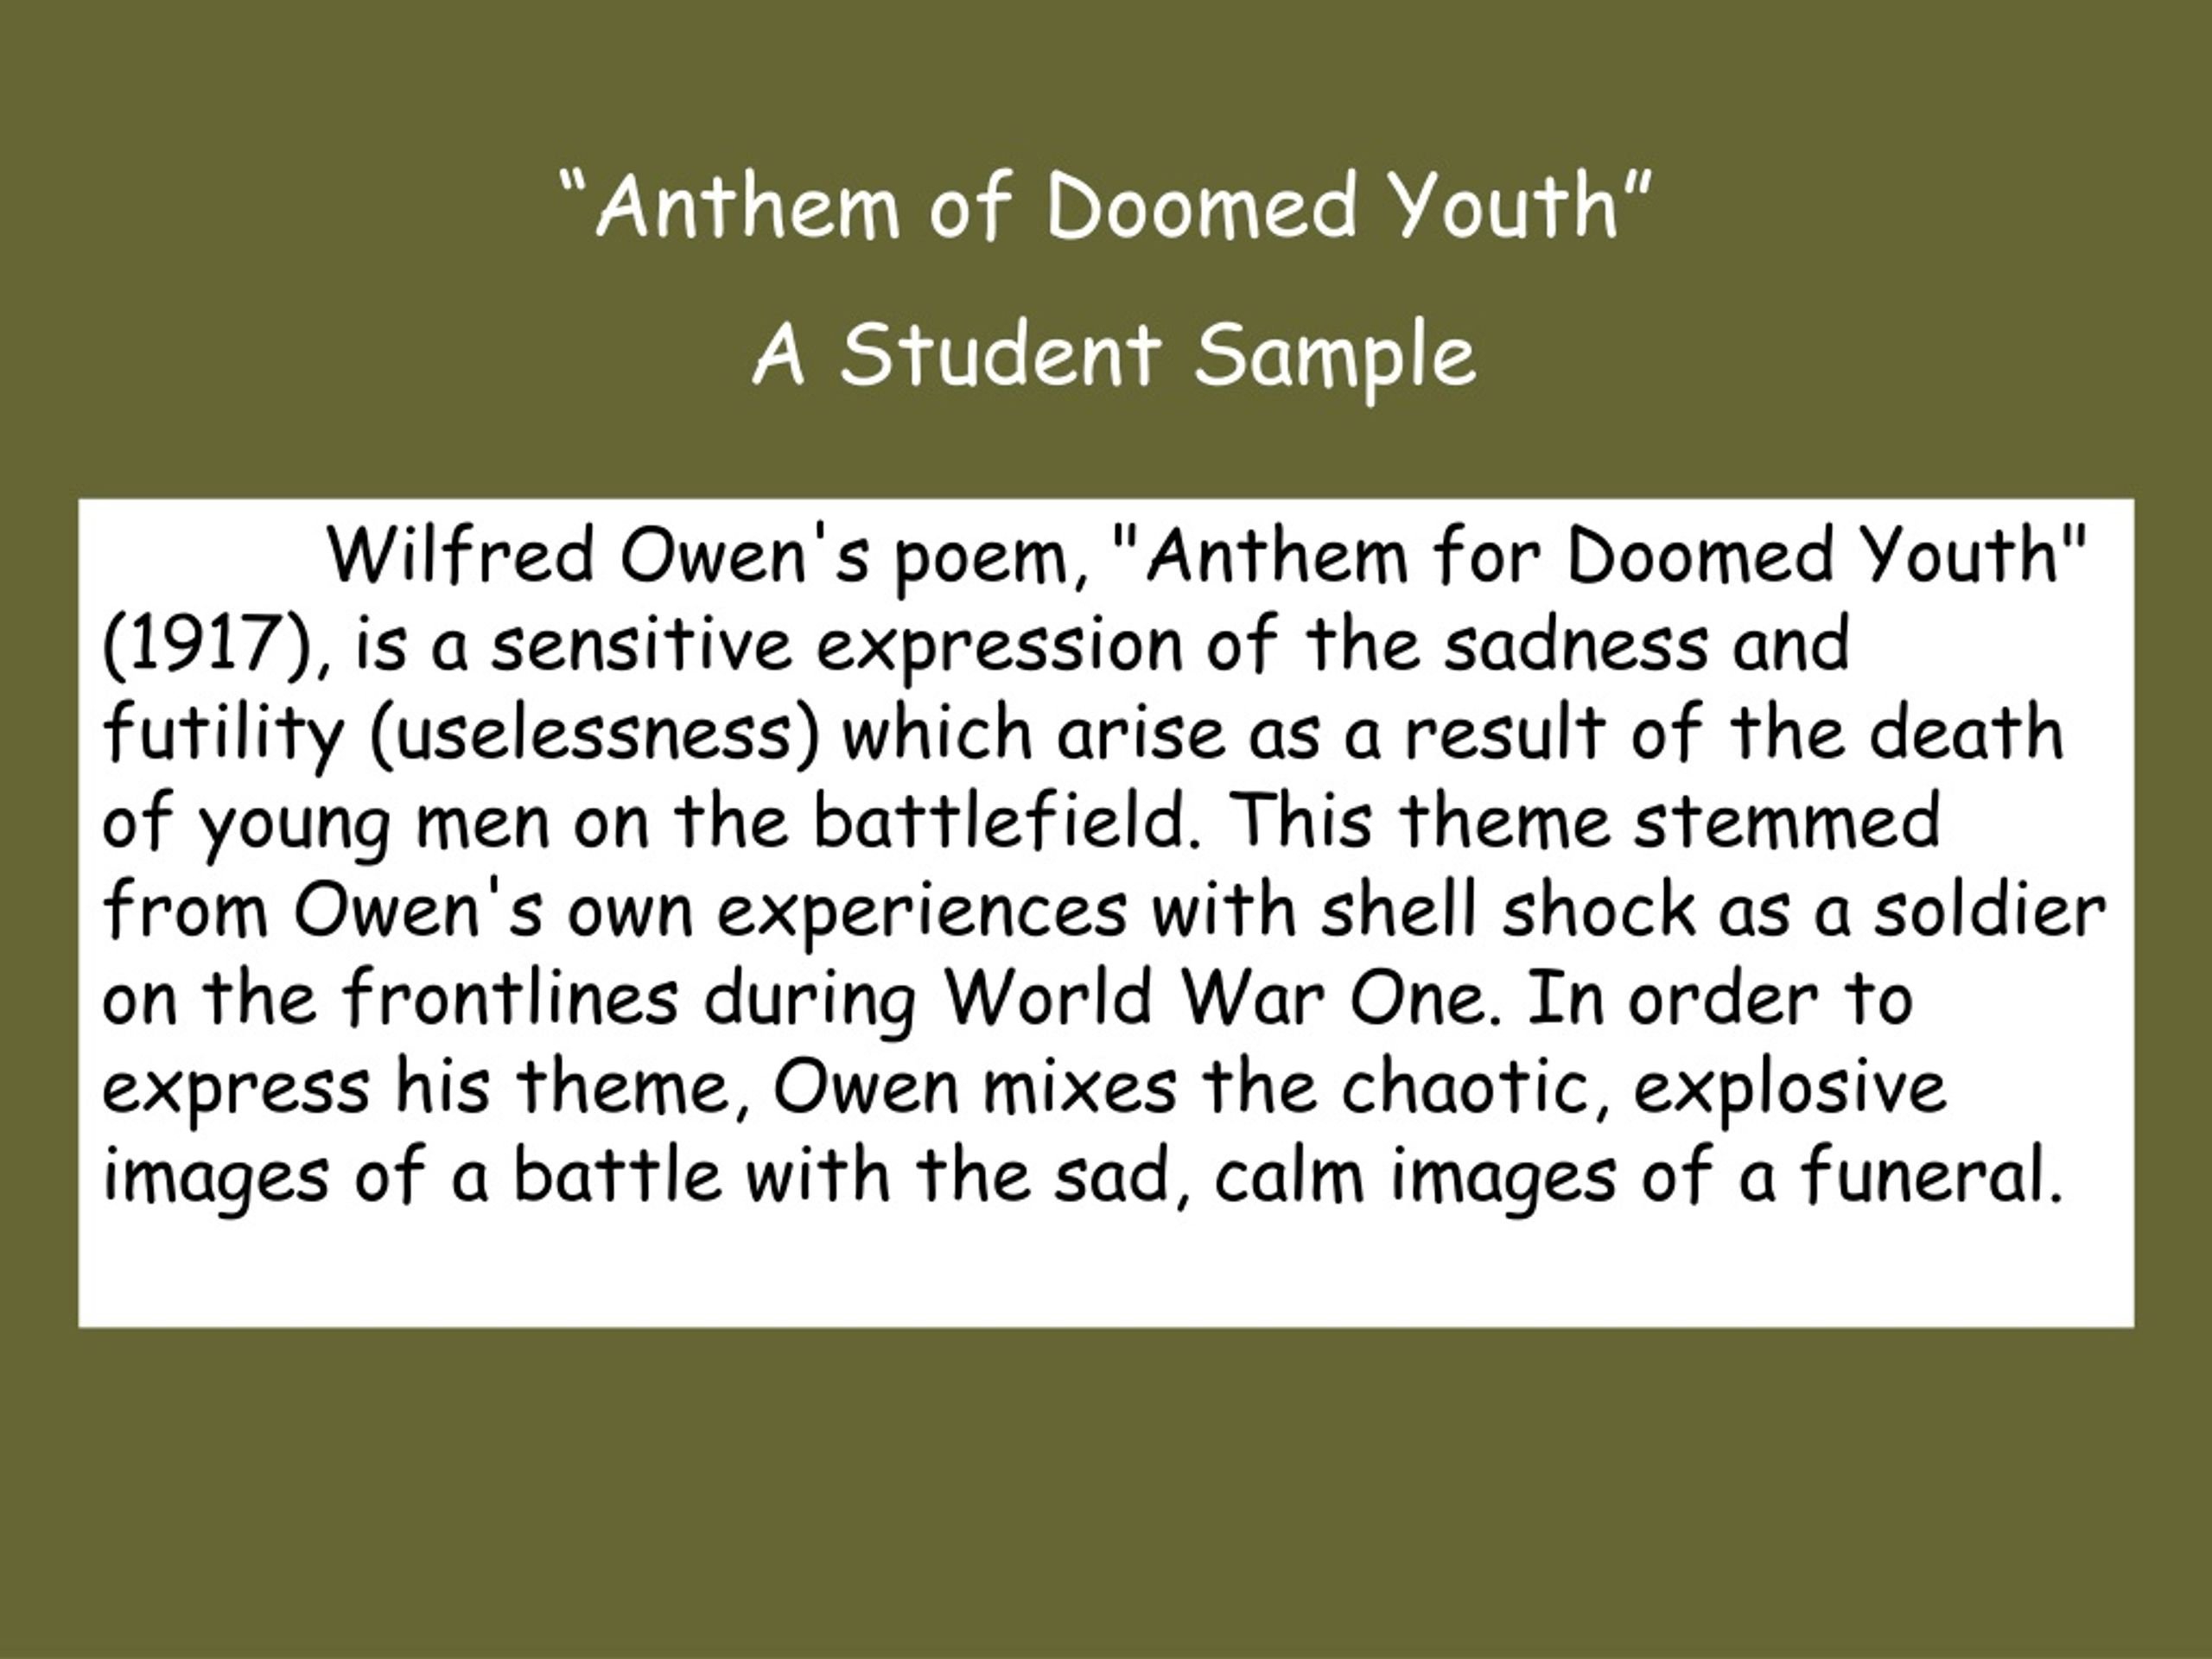 Analysis of Anthem for Doomed Youth, Wilfred Owen